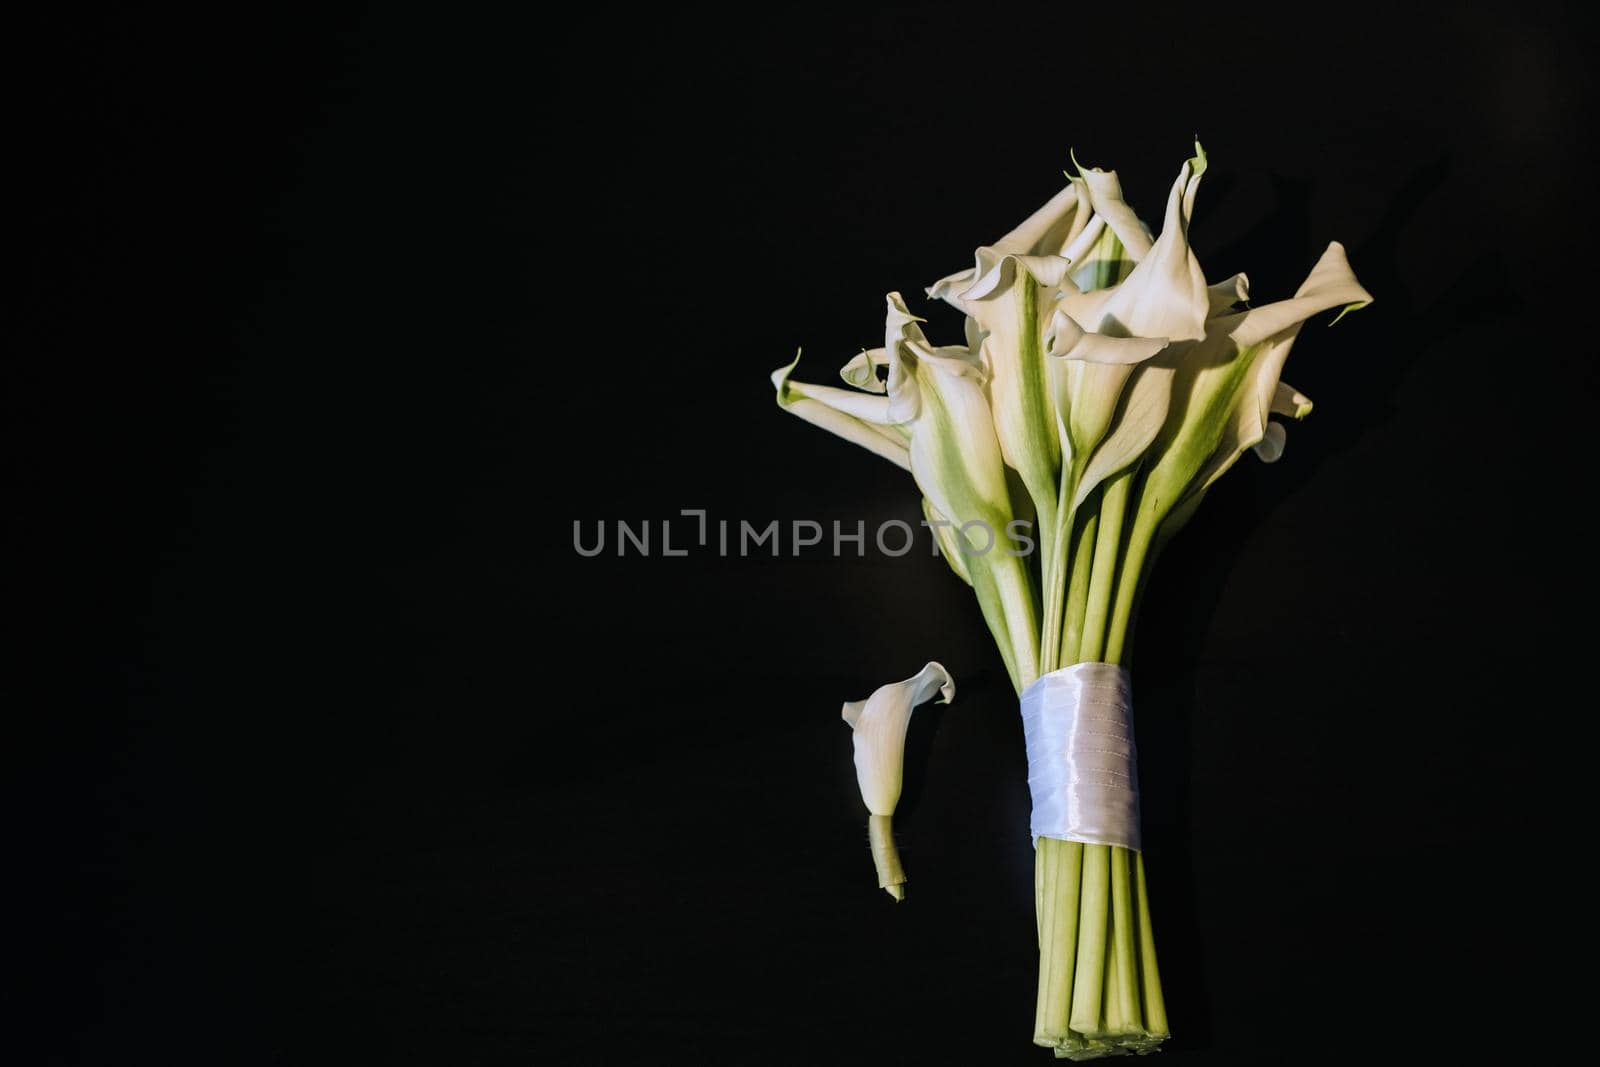 Wedding bouquet of white Calla lilies on a black background.